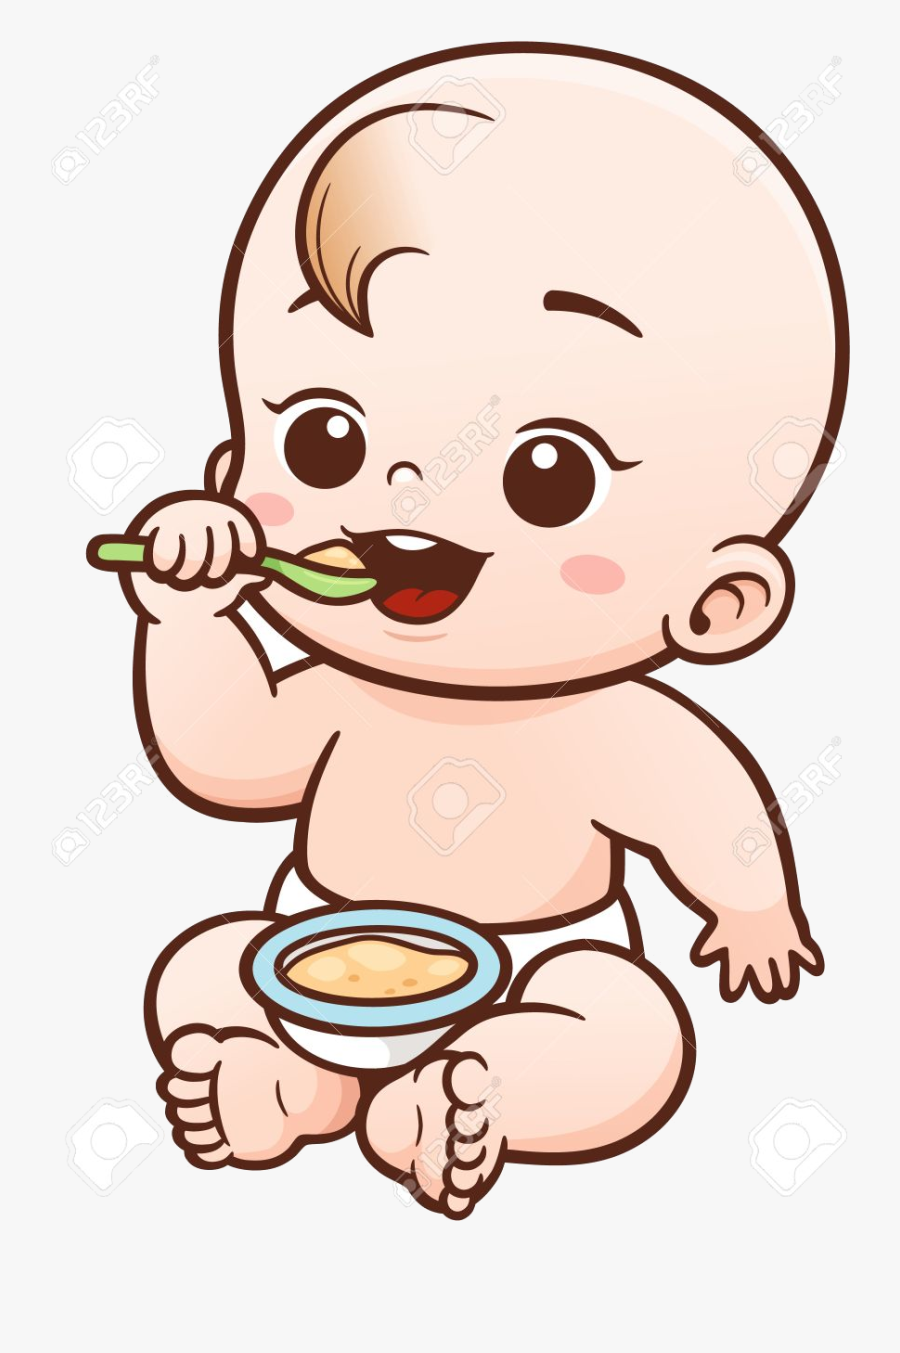 Eating Baby Clipart Vector Illustration Of Cartoon - Baby Eating Cartoon, Transparent Clipart